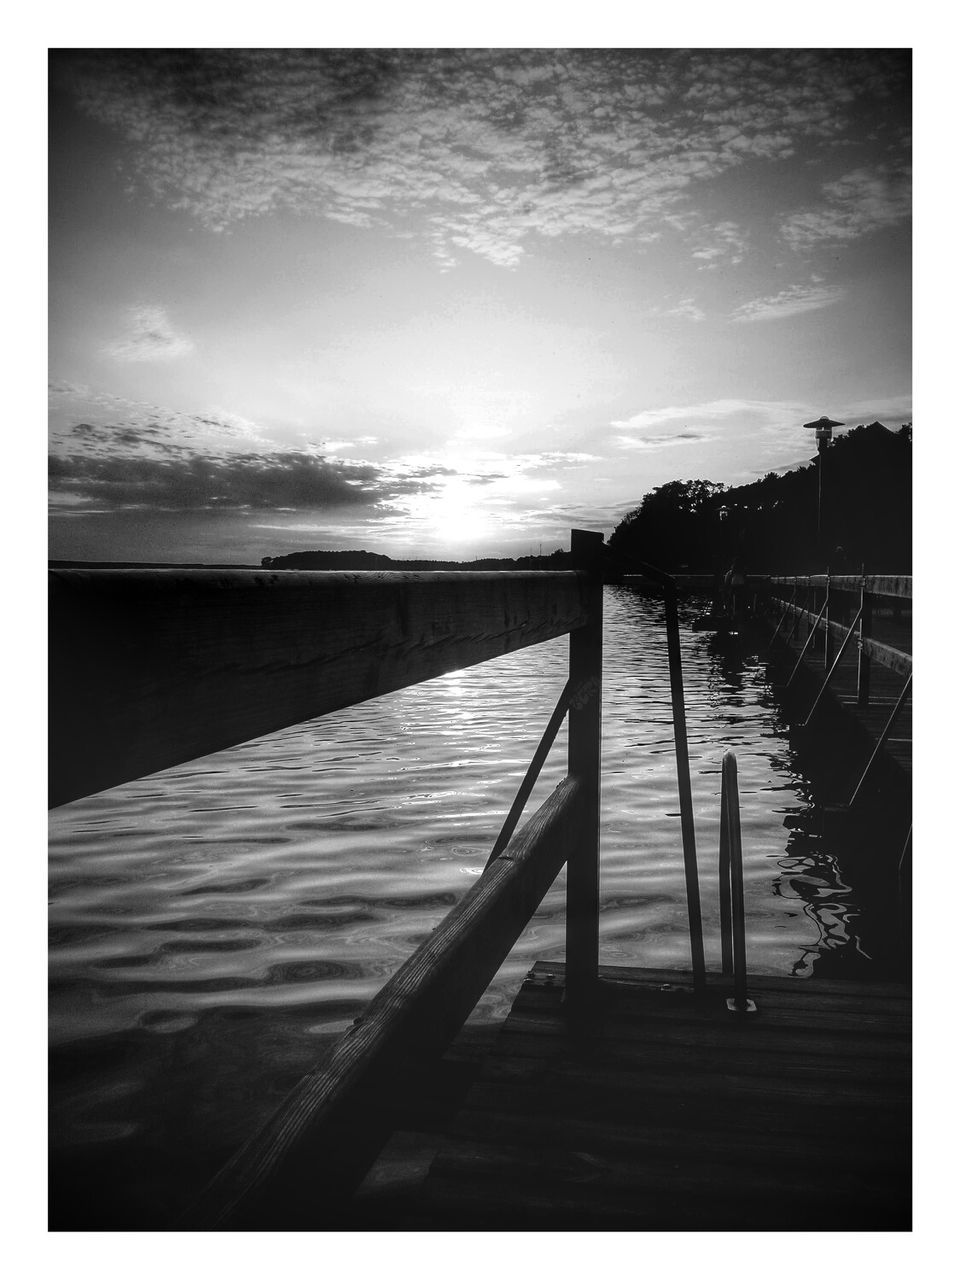 water, transfer print, tranquil scene, tranquility, auto post production filter, scenics, sky, sea, beauty in nature, nature, pier, the way forward, sunset, diminishing perspective, idyllic, sunlight, reflection, railing, lake, beach